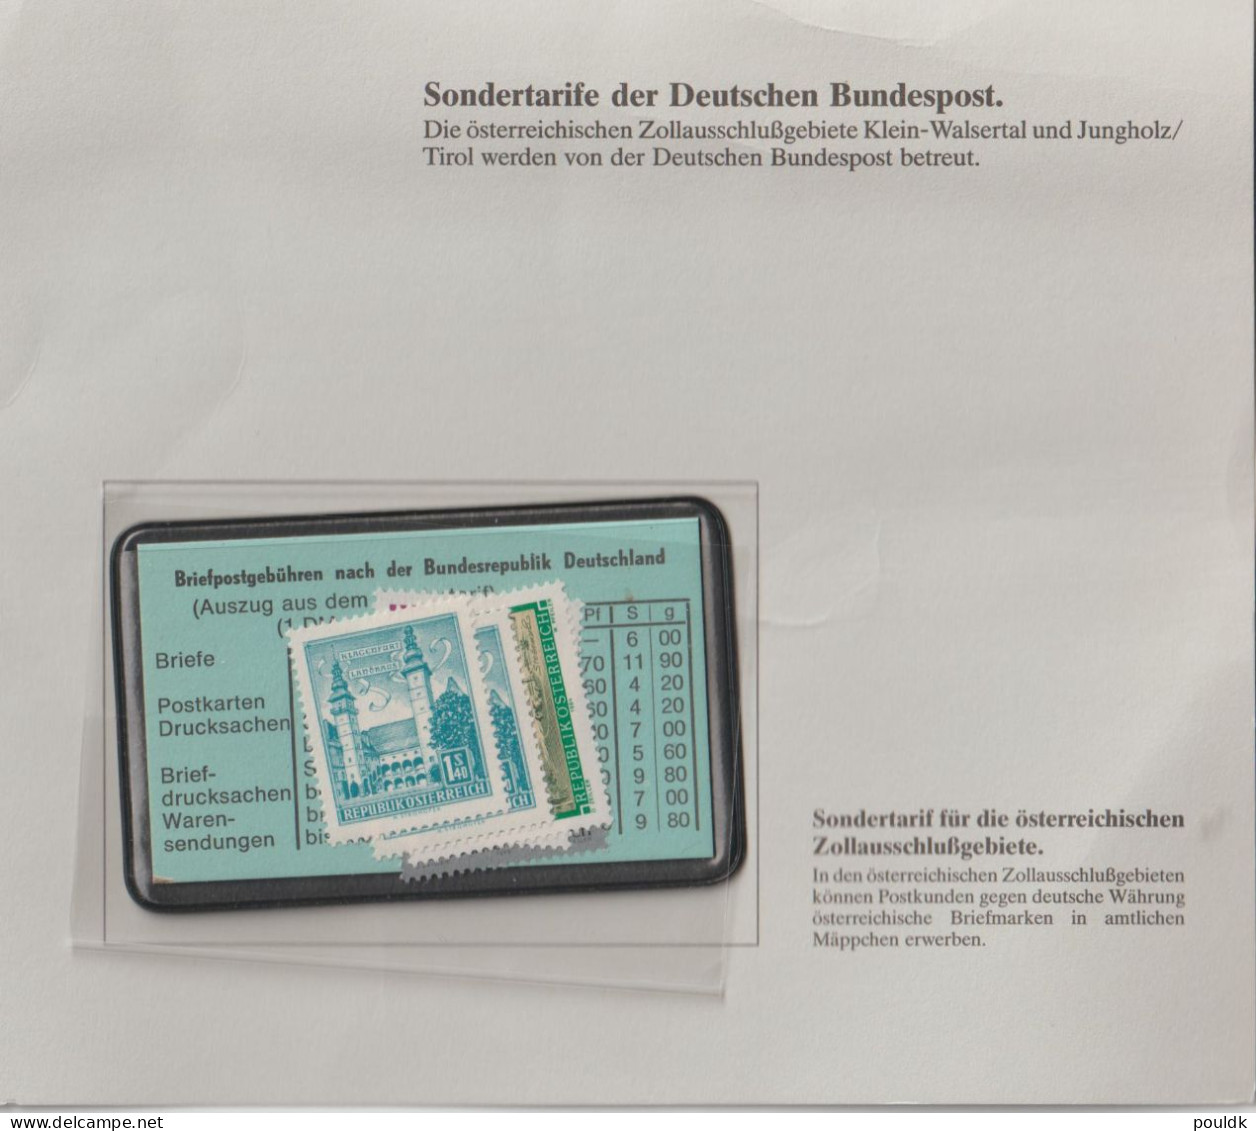 Map W/Austrian Stamps To Be Used By Two Small Areas In Austria Being Serviced By The German Post - Mint. Postal Weight A - Ongebruikt